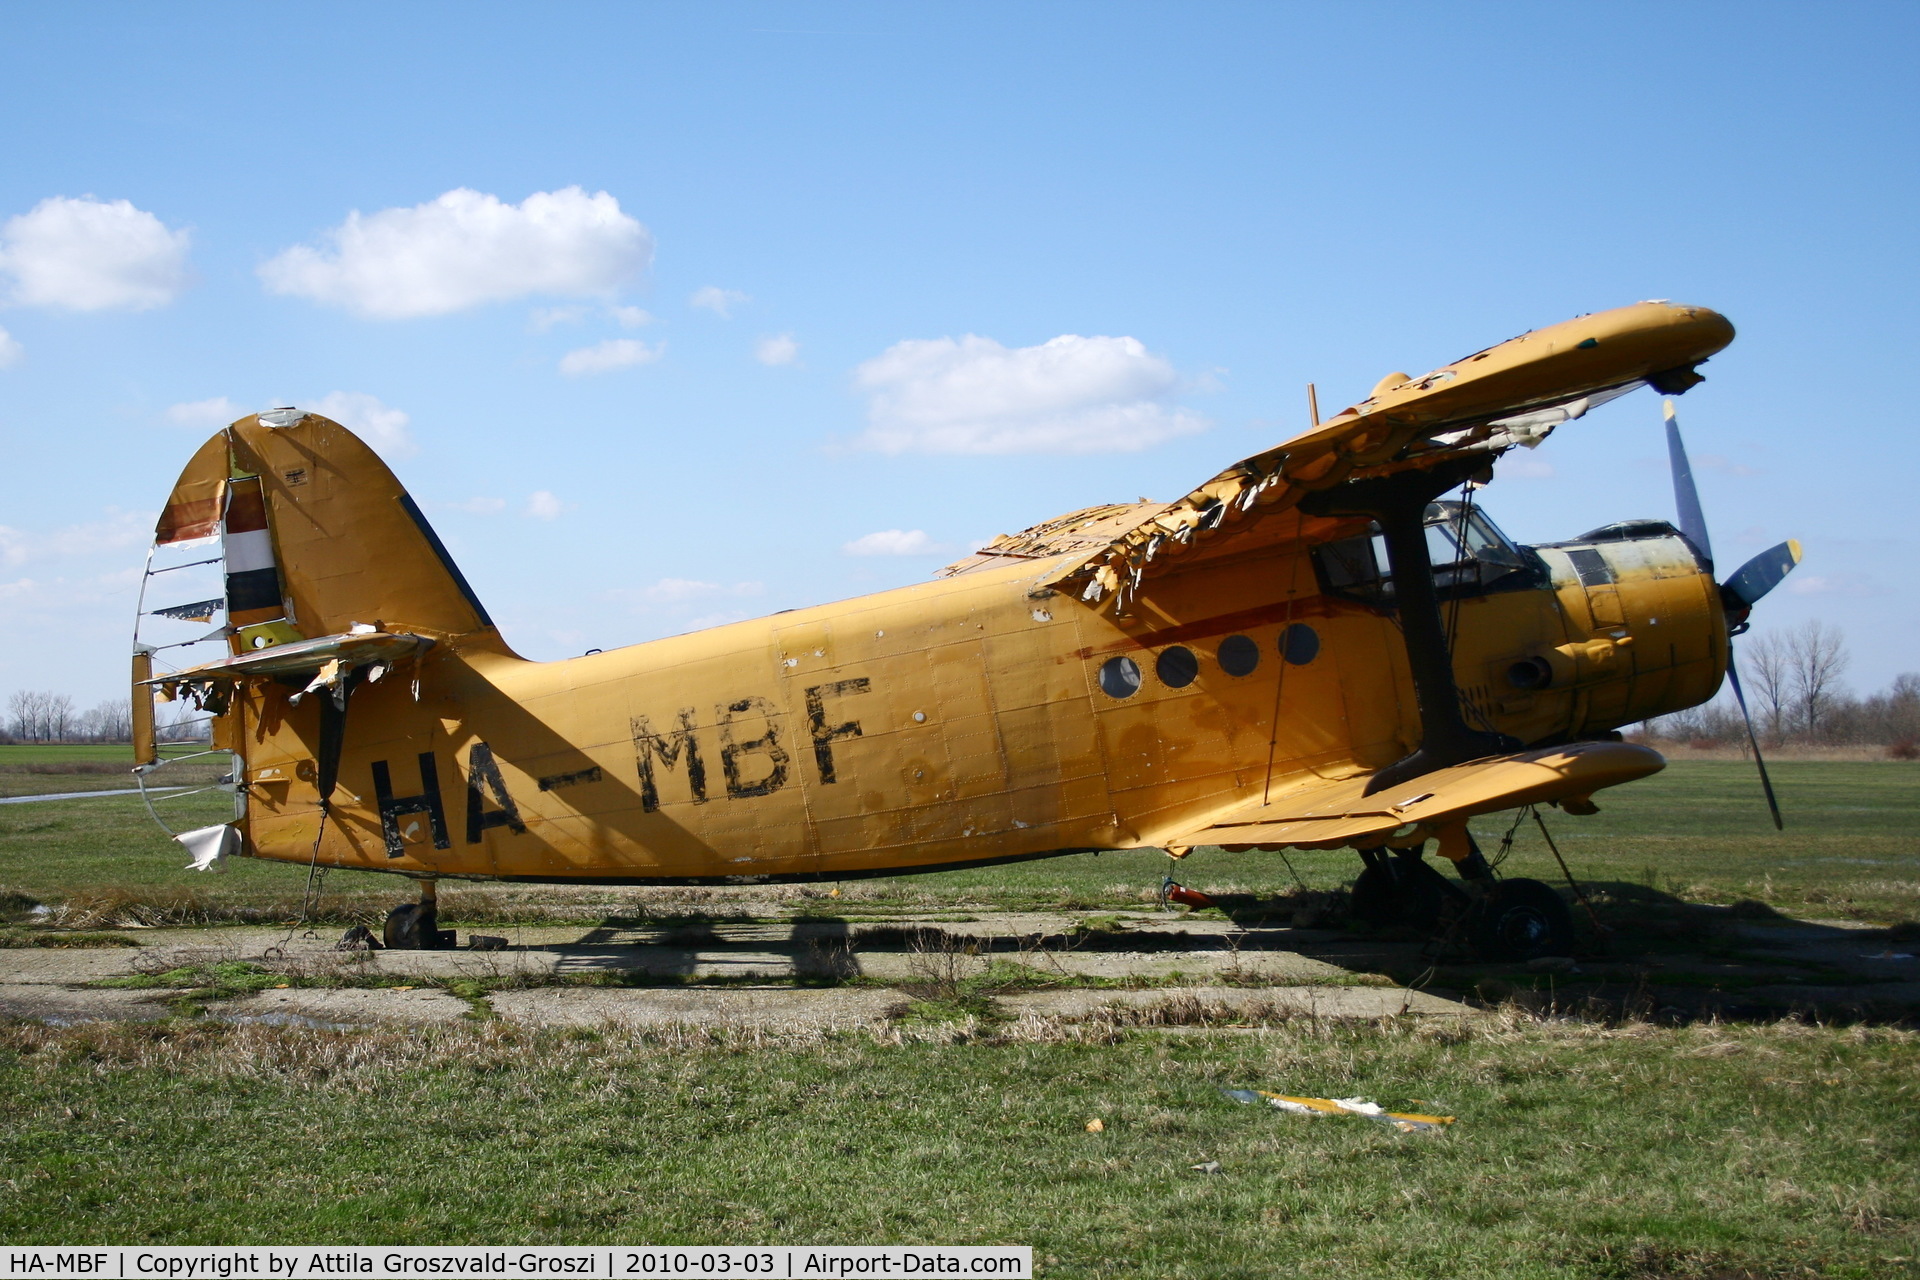 HA-MBF, 1975 PZL-Mielec An-2R C/N 1G161-11, Szarvas-Káka, Hungary - agricultural airport and take-off field